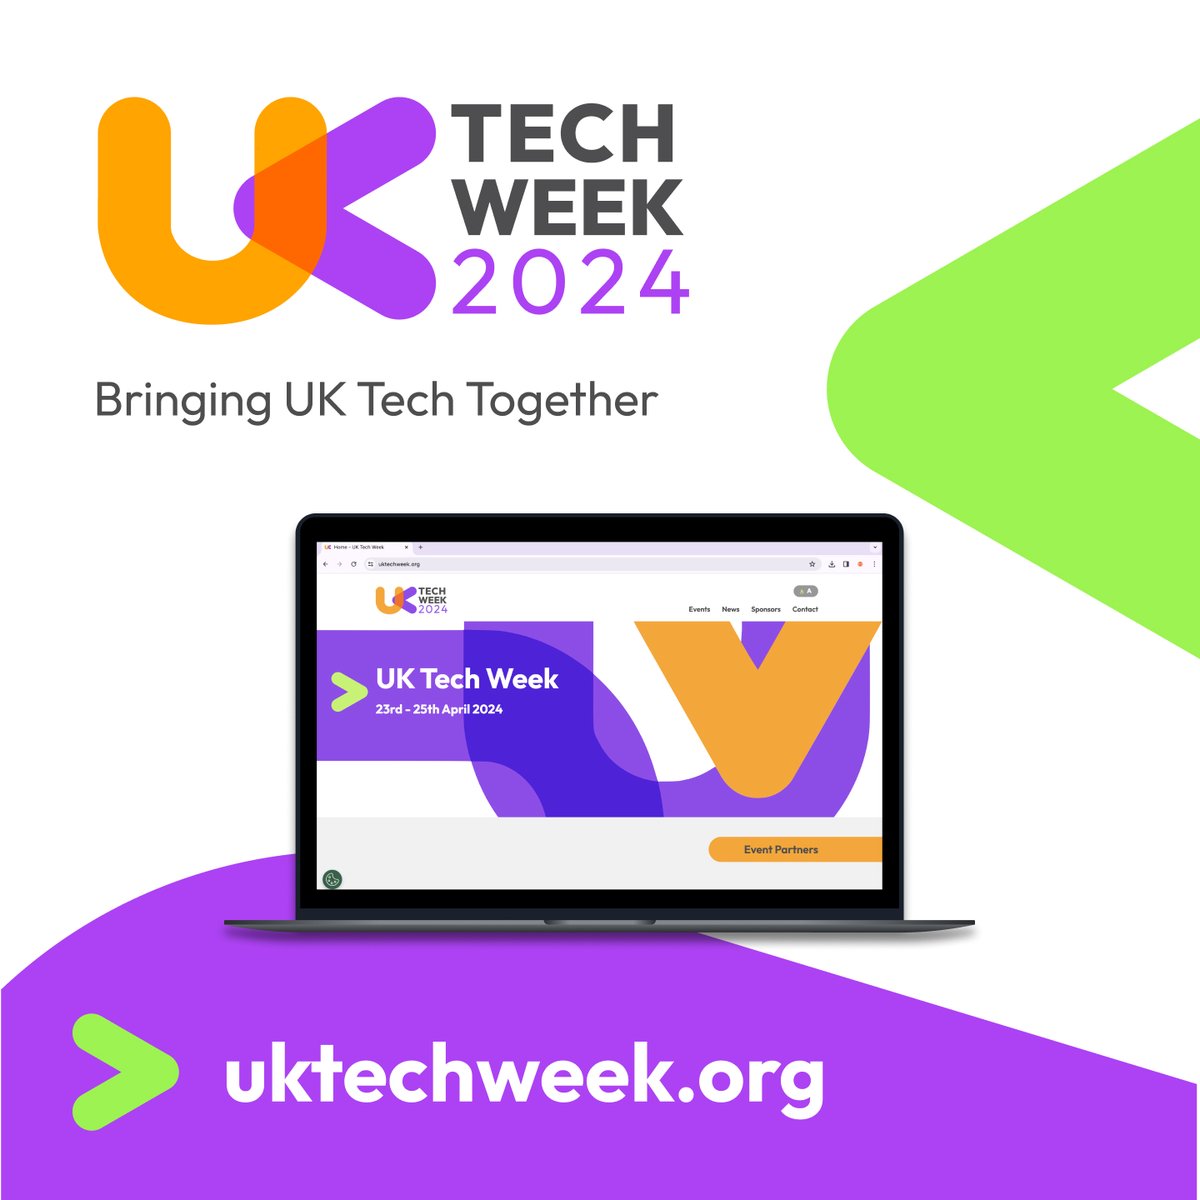 The official #UKTechWeek website is now live! It's your chance to discover our official event partners, stay up-to-date with our latest news, and sign up to our newsletter to be the first to hear about our event announcements! 👉🏻 bit.ly/3It0ZVj #Innovation #Collaboration